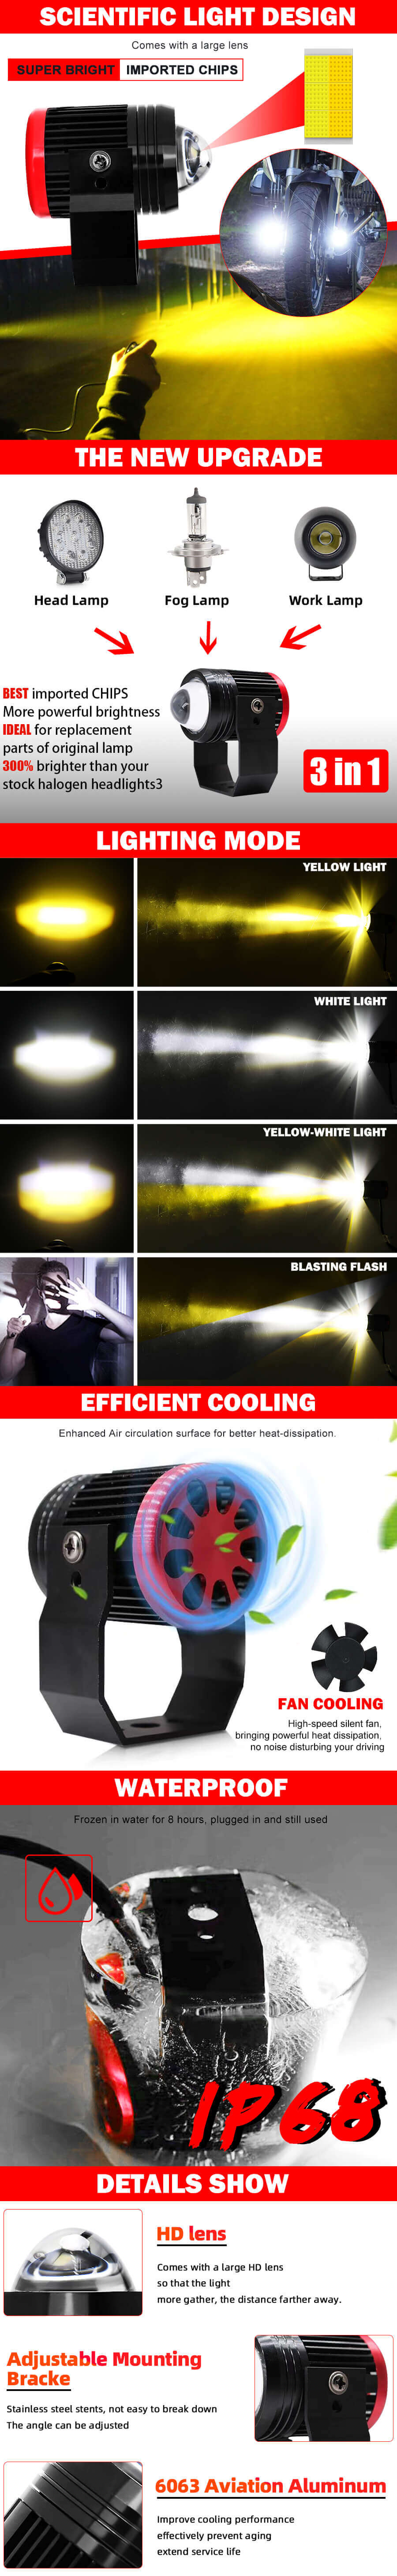 External Flashing Dual Colors Integration Led Auxiliary Light for Motorcycle JG-993A ADVANTAGES